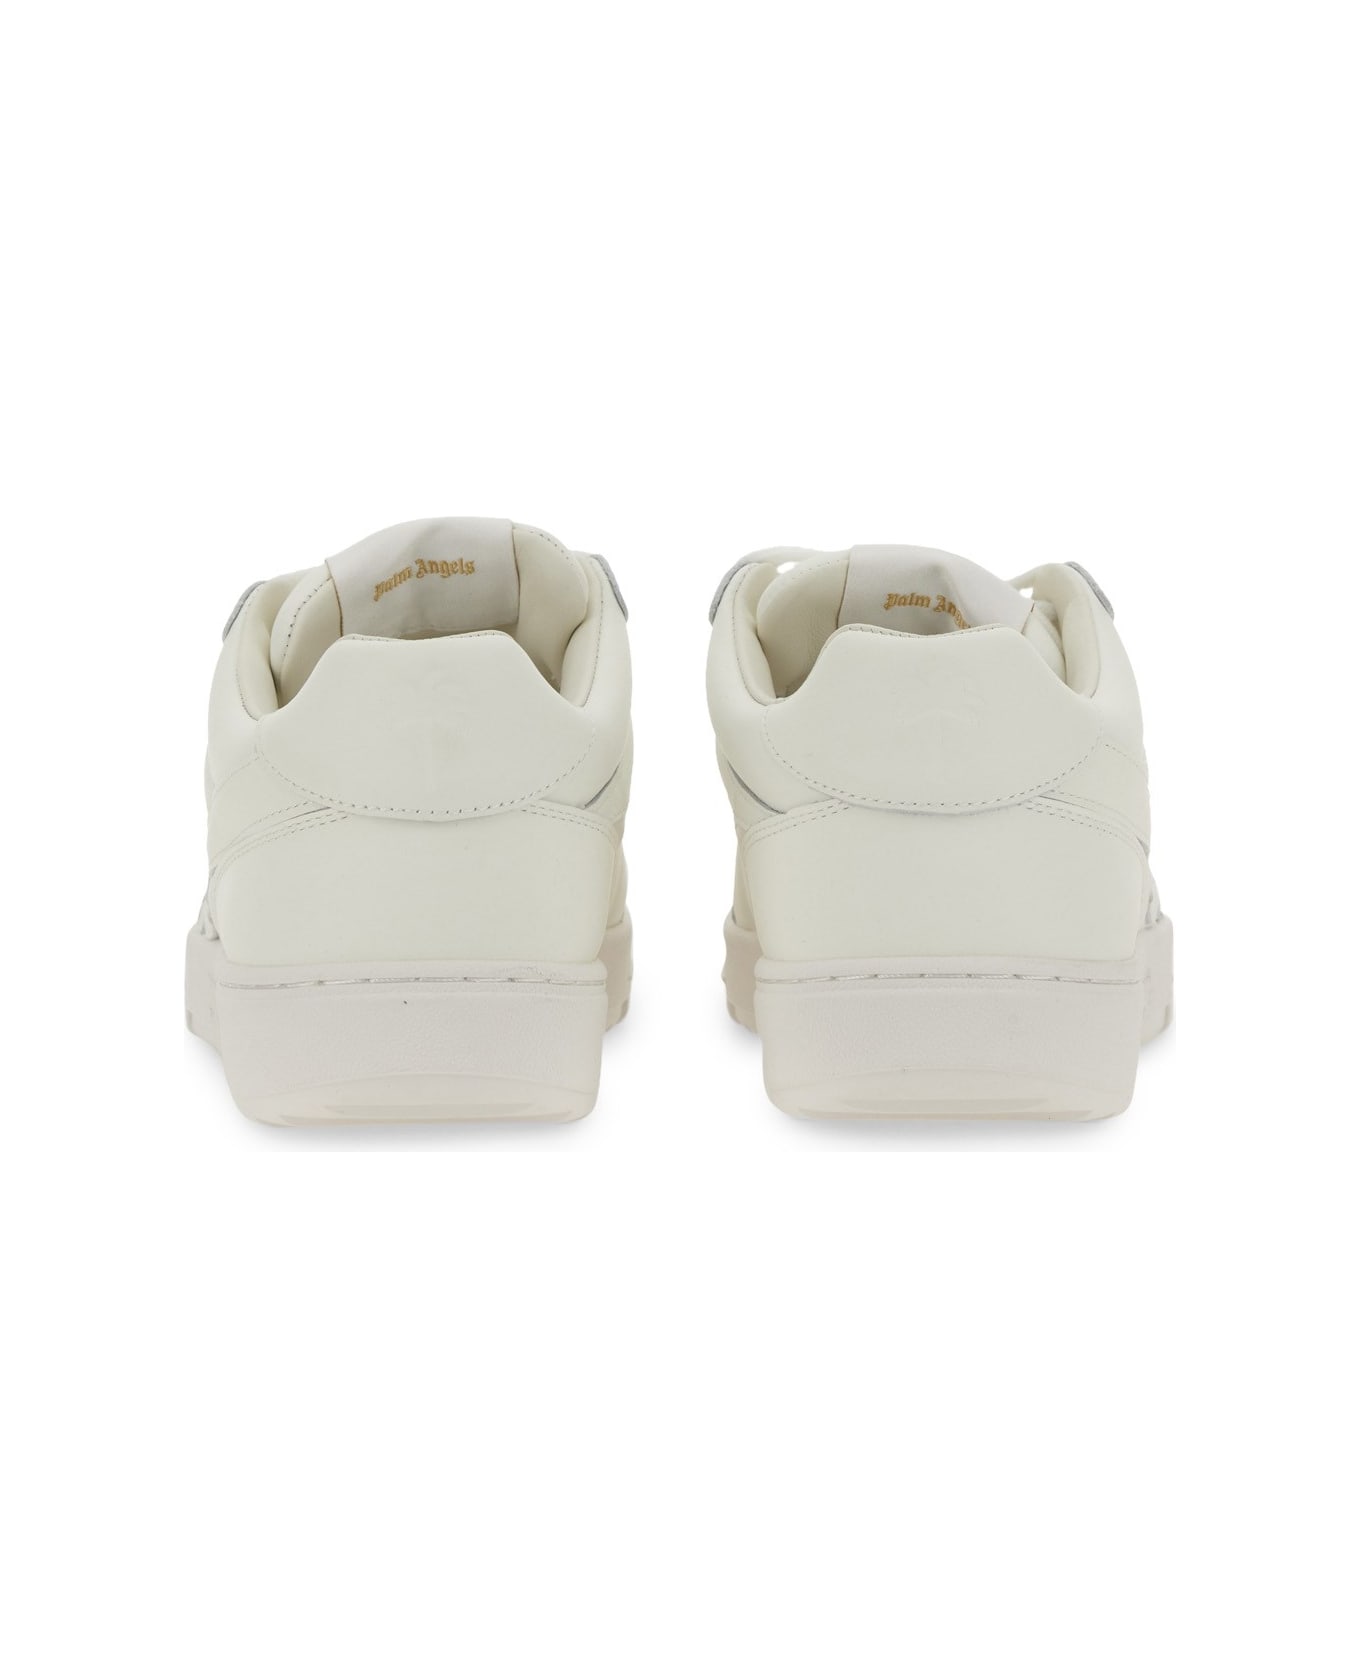 Palm Angels 'palm Beach University' White Leather Sneakers - BIANCO